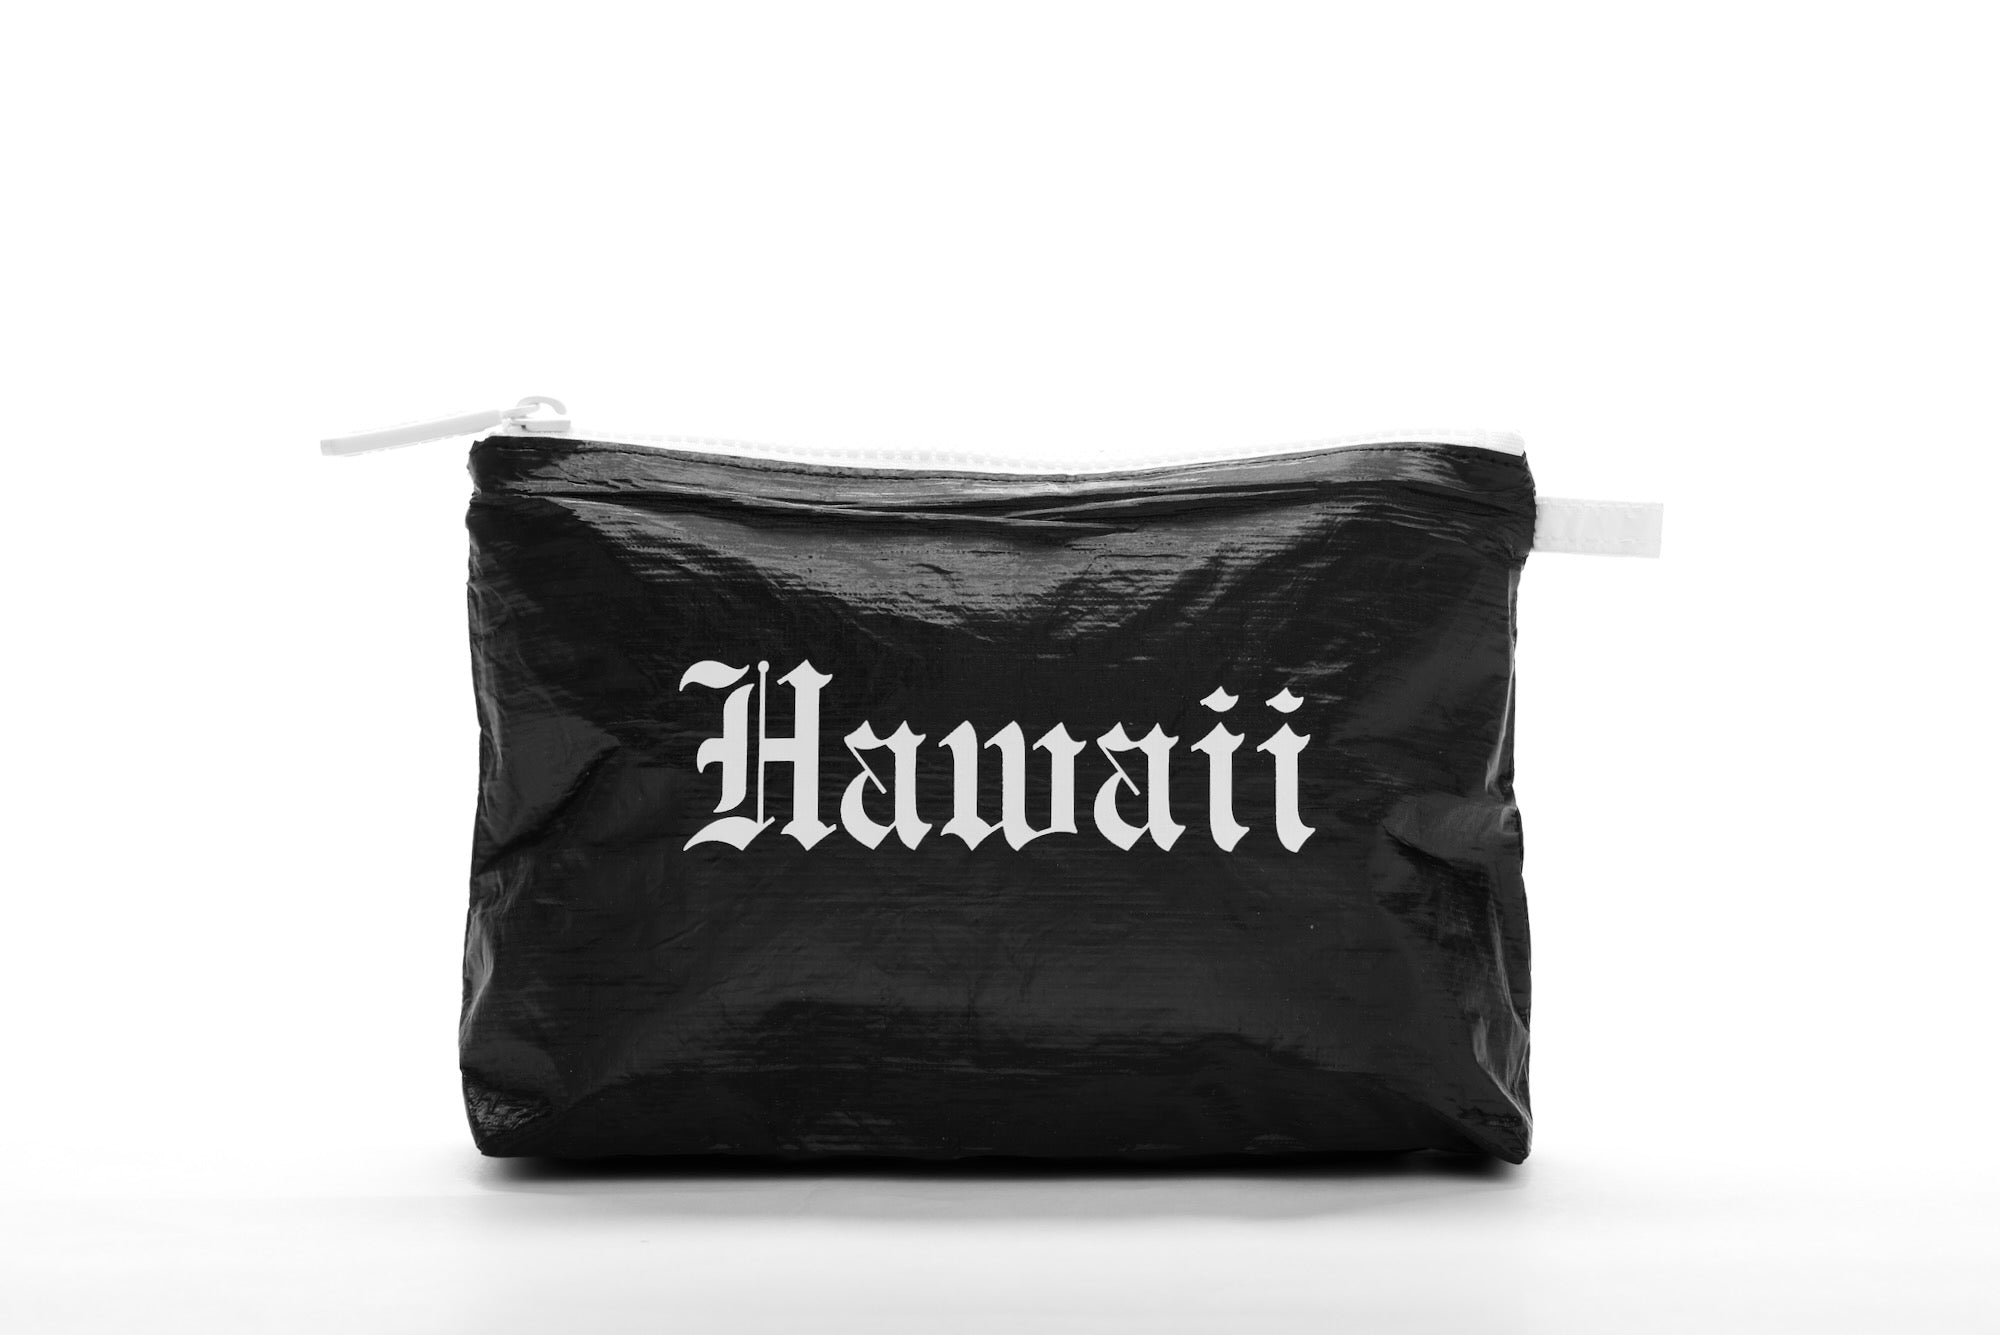 Pure Tyvek Black Small Pouch | Hawaii Coated Tyvek Pouch | Citadine